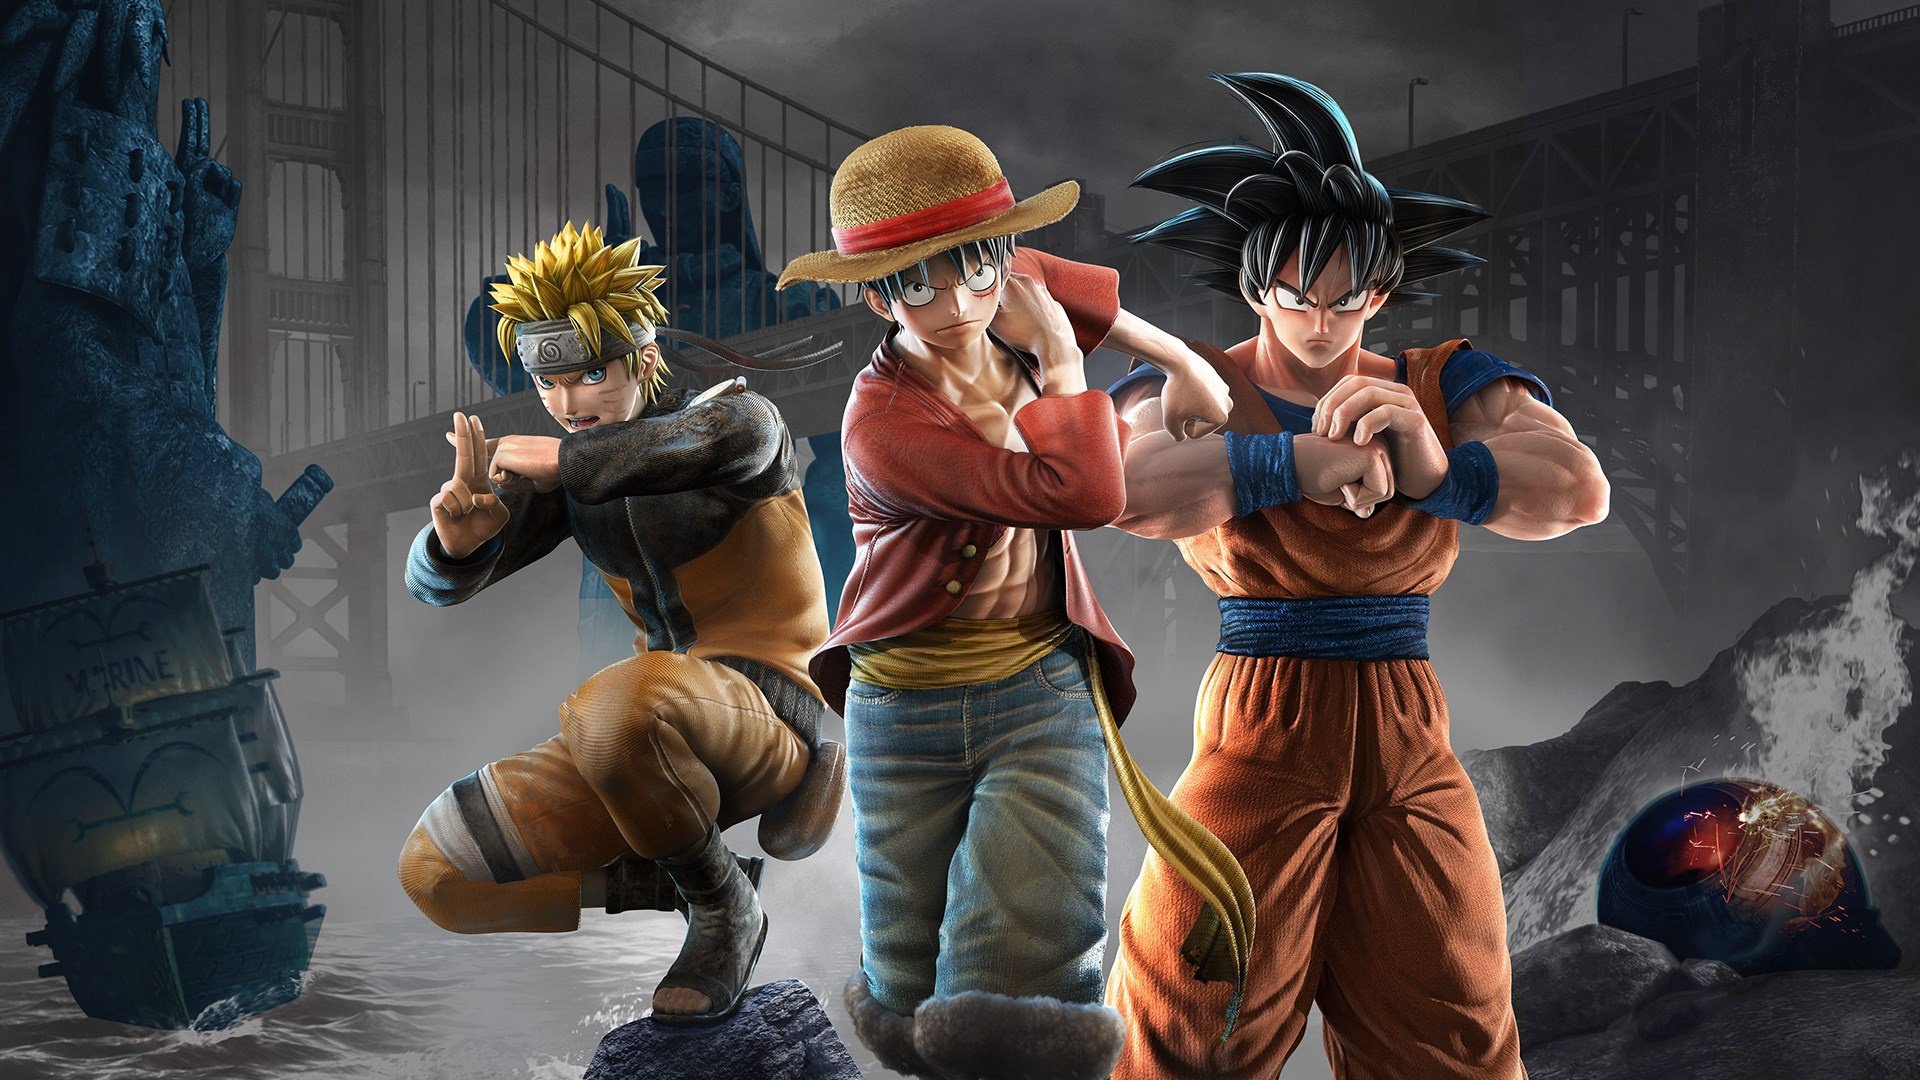 jump force pc deluxe edition